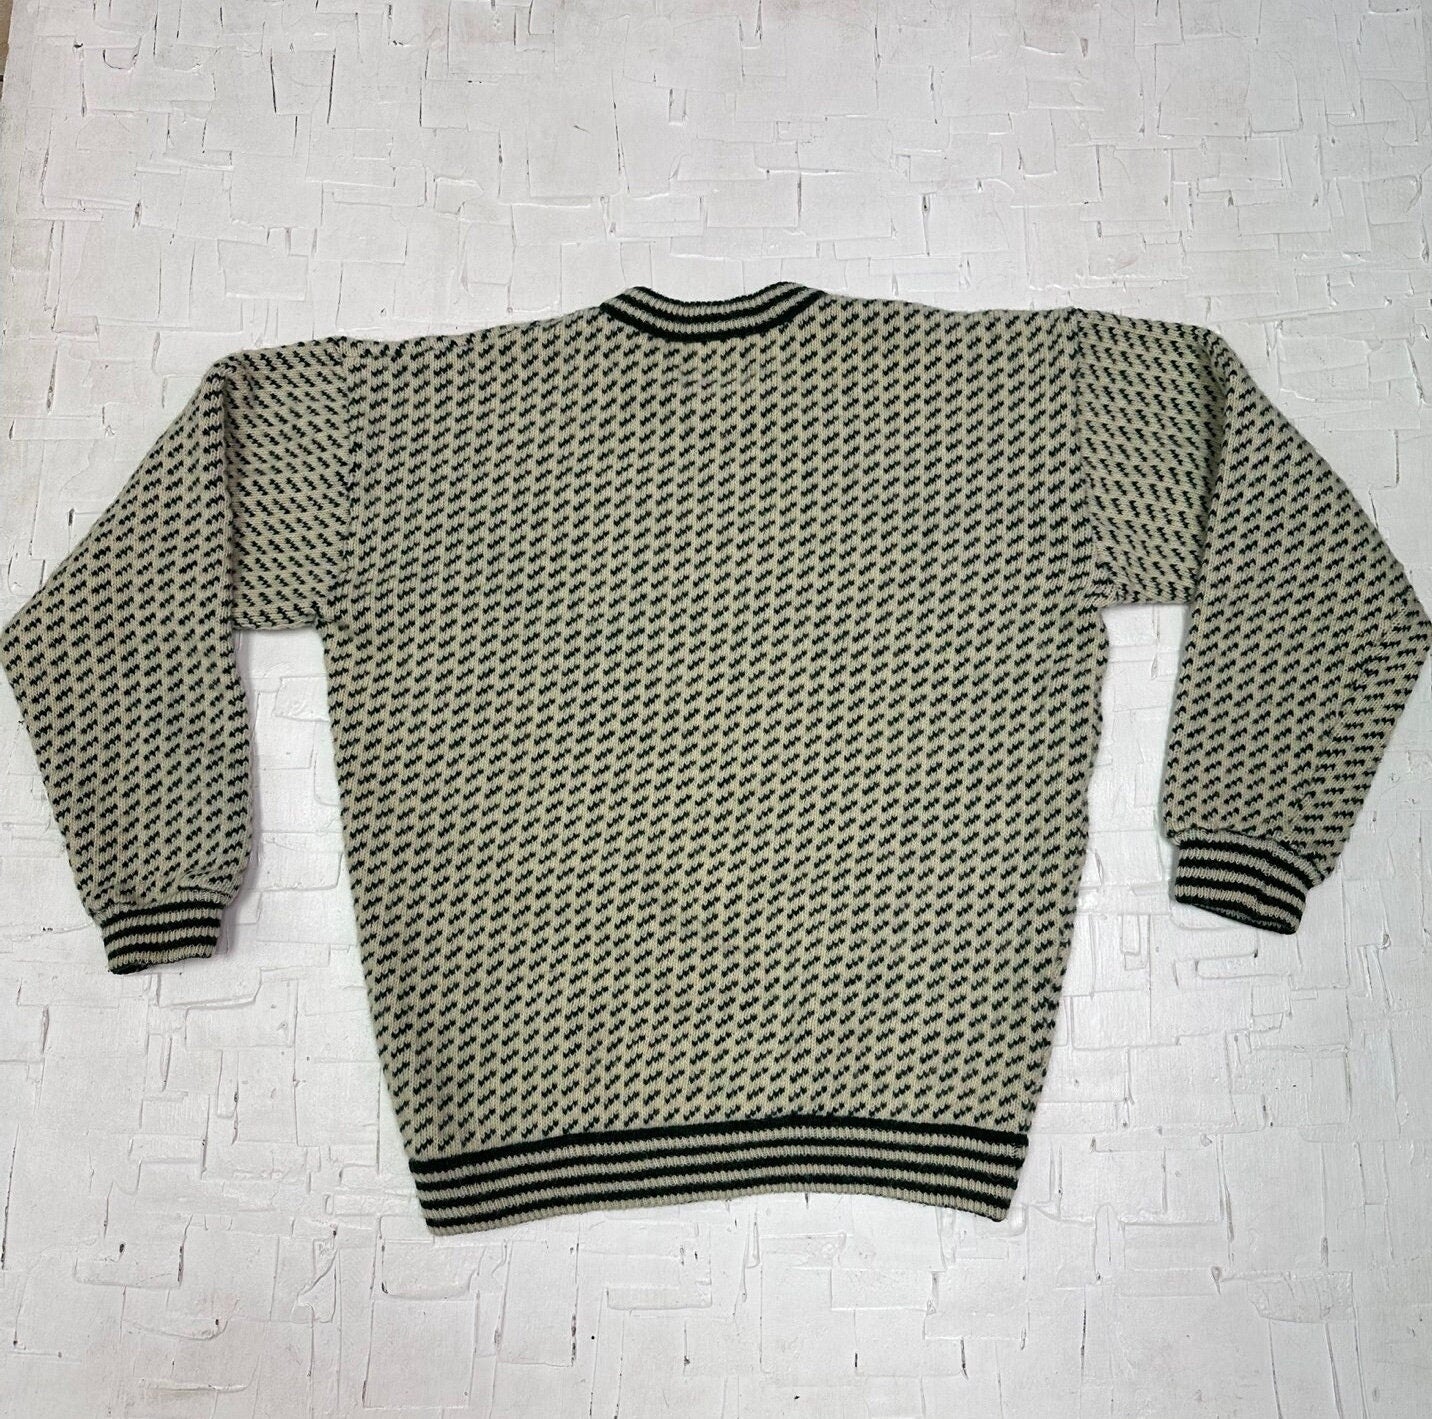 Vintage Roots Green and White Wool Knit Sweater | Vintage Sweater | Roots | Wool | Made in Norway | Vintage Knitwear | SKU M-2069 |